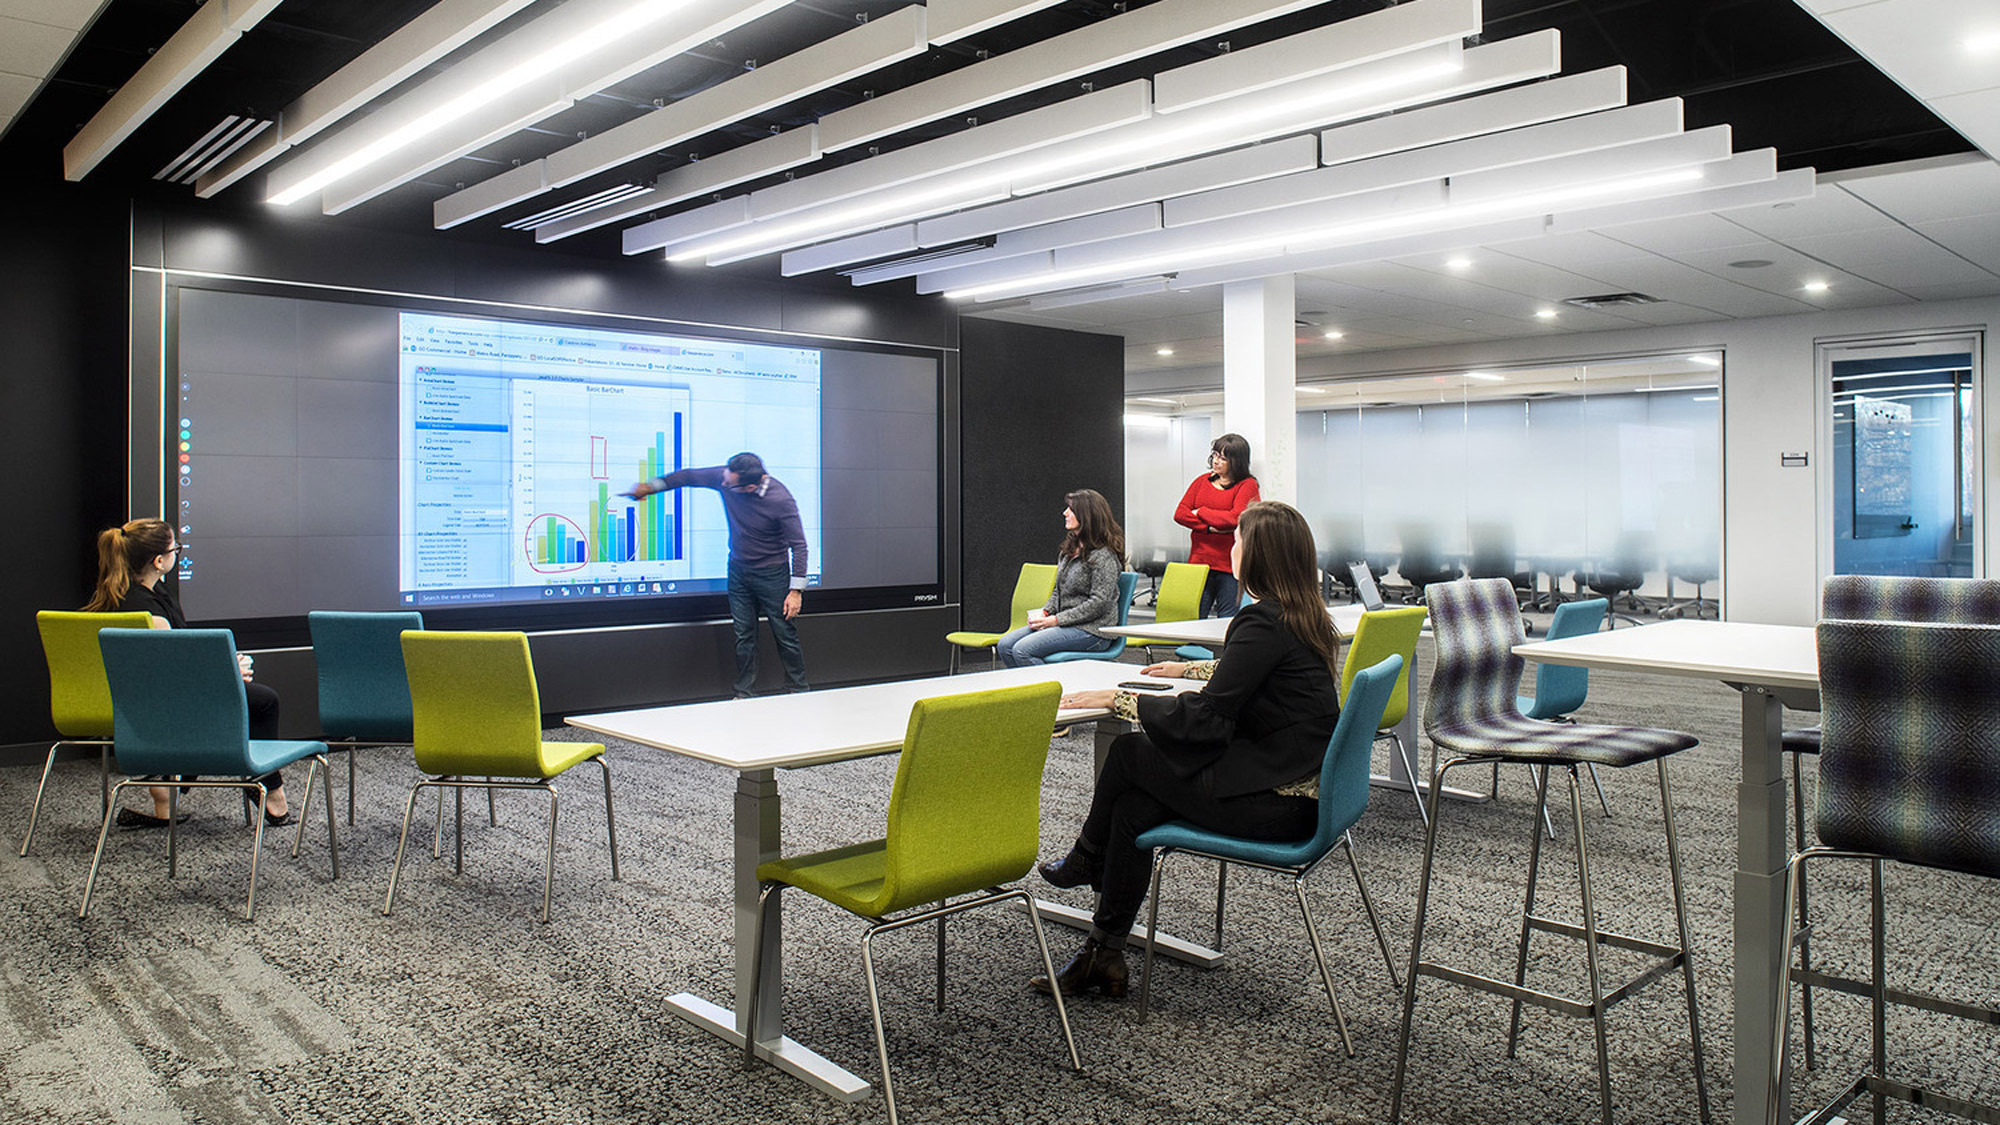 Modern office meeting area with a large digital presentation screen. Colorful chairs in green and blue hues contrast with the monochromatic carpet. Overhead, linear lights complement the sleek, contemporary vibe of the workspace.